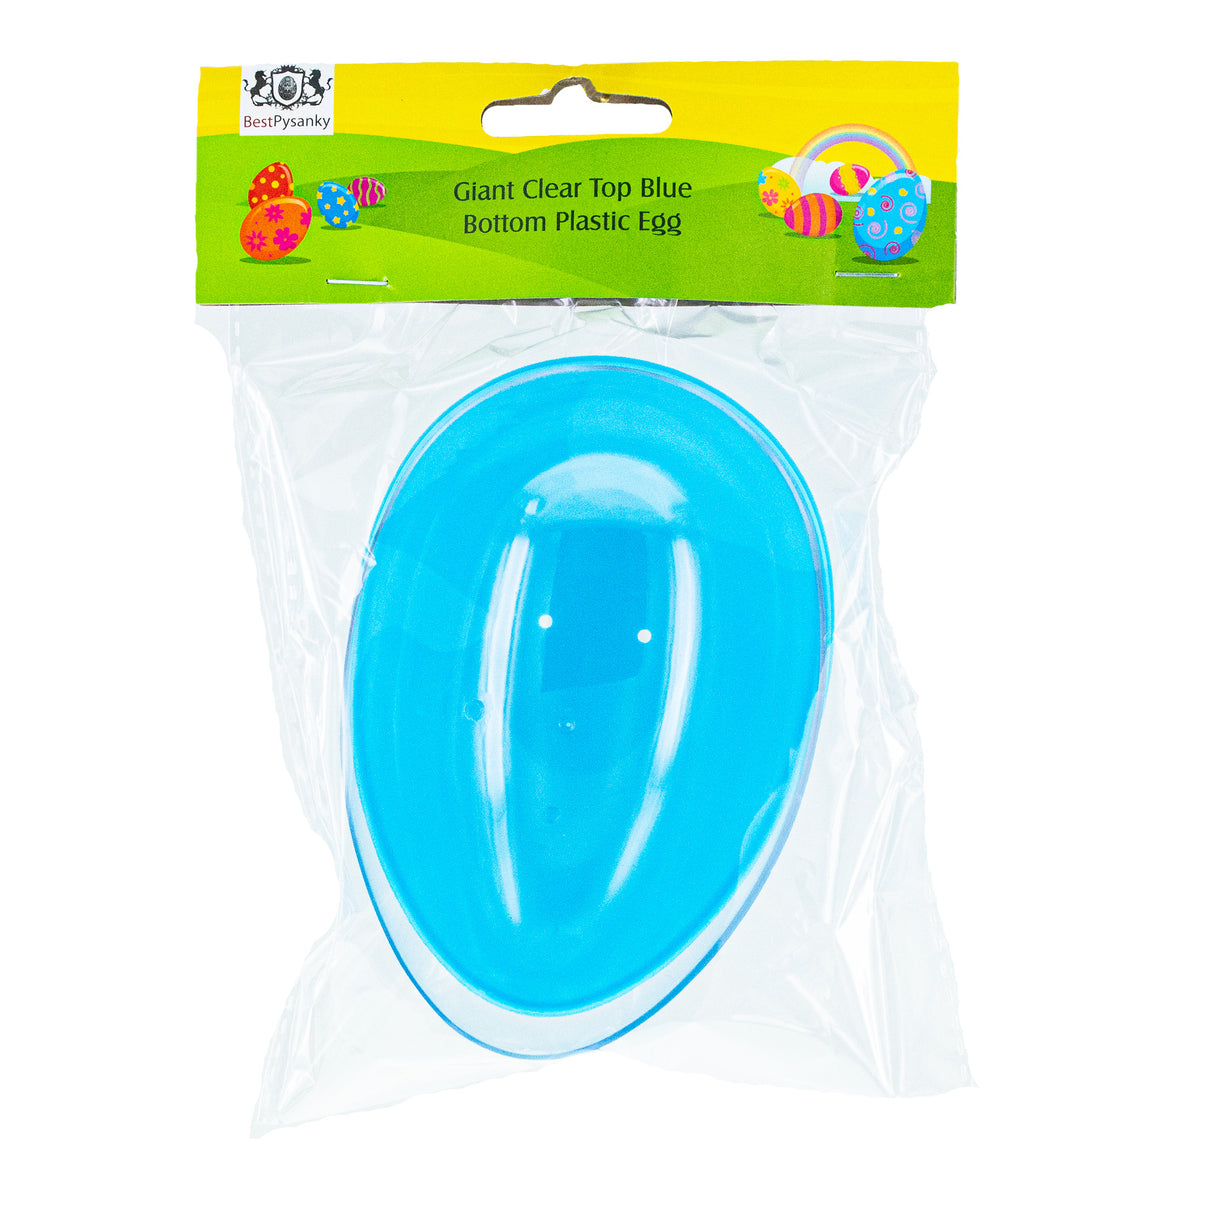 Shop Large Fillable Clear Top Blue Bottom Plastic Easter Egg 5.1 Inches. Buy Easter Eggs Plastic Large Egg Blue Oval Plastic for Sale by Online Gift Shop BestPysanky giant egg, fillable plastic egg, plastic egg,  plastic egg fillable, easter eggs bulk, plastic egg for toys, Easter decor, plastic eggs easter, egg hunt, Easter decorations, decorative